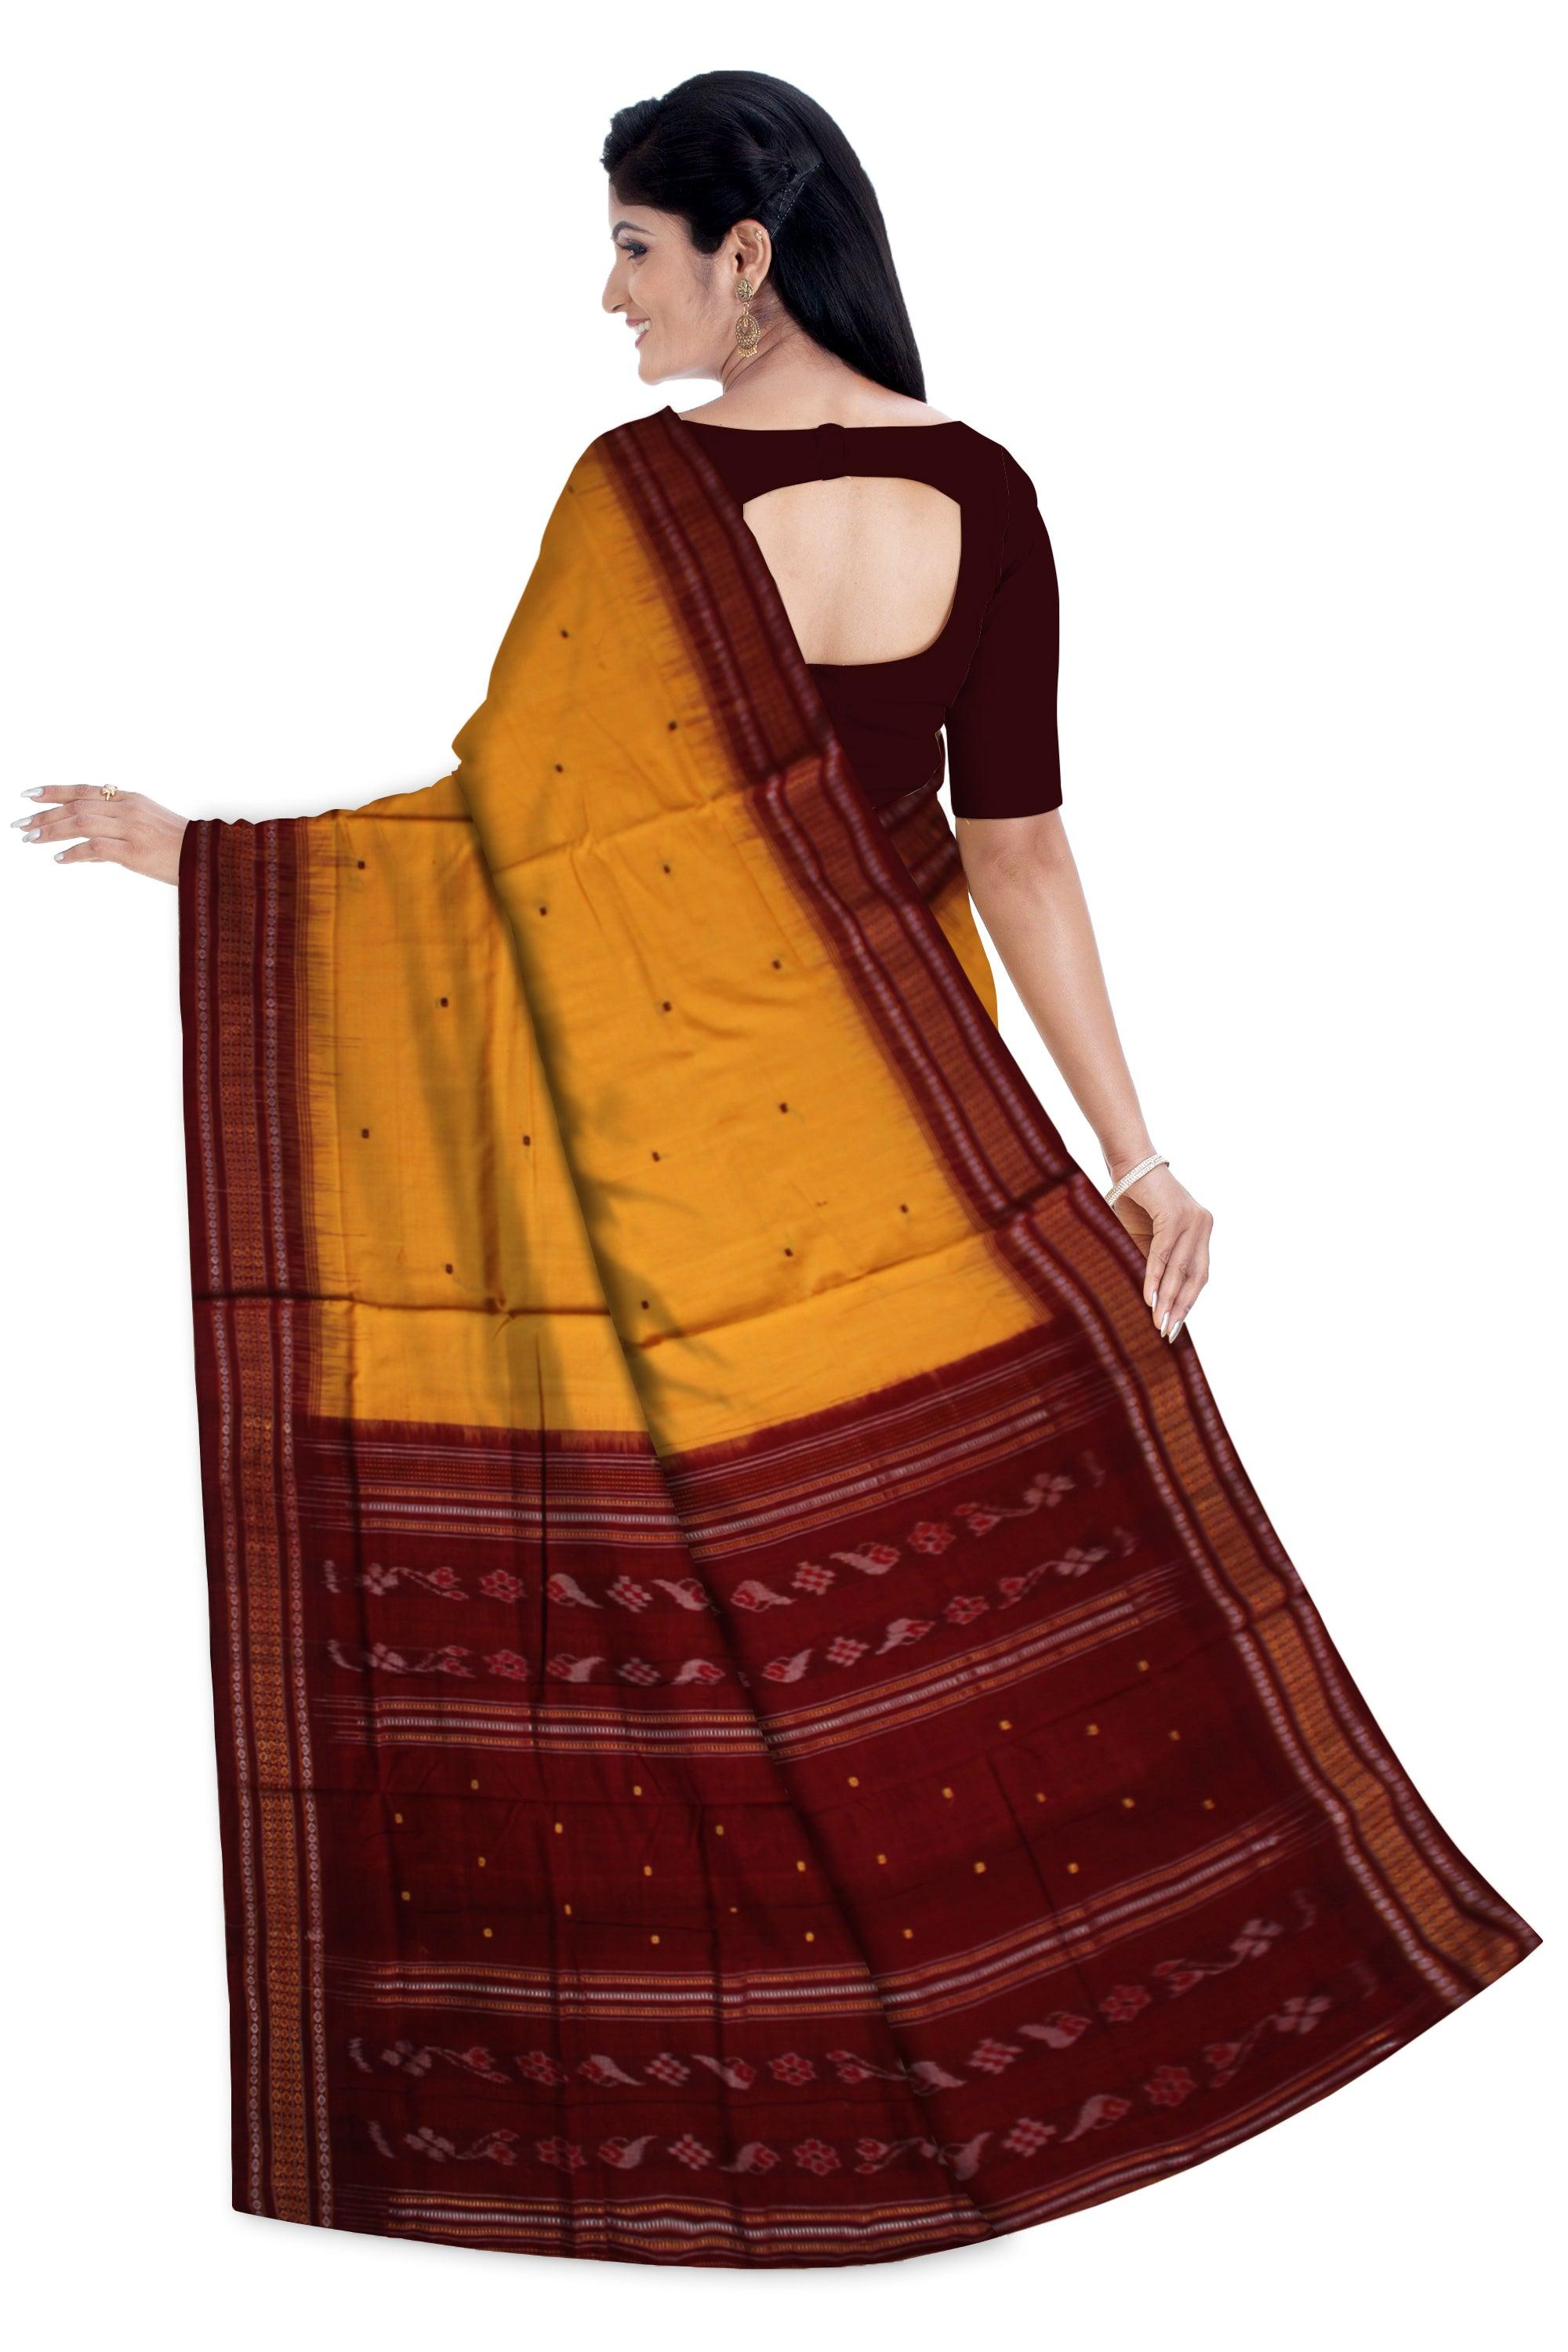 YELLOW AND MAROON COLOR BOOTY PATTERN COTTON SAREE, WITH OUT BLOUSE PIECE. - Koshali Arts & Crafts Enterprise